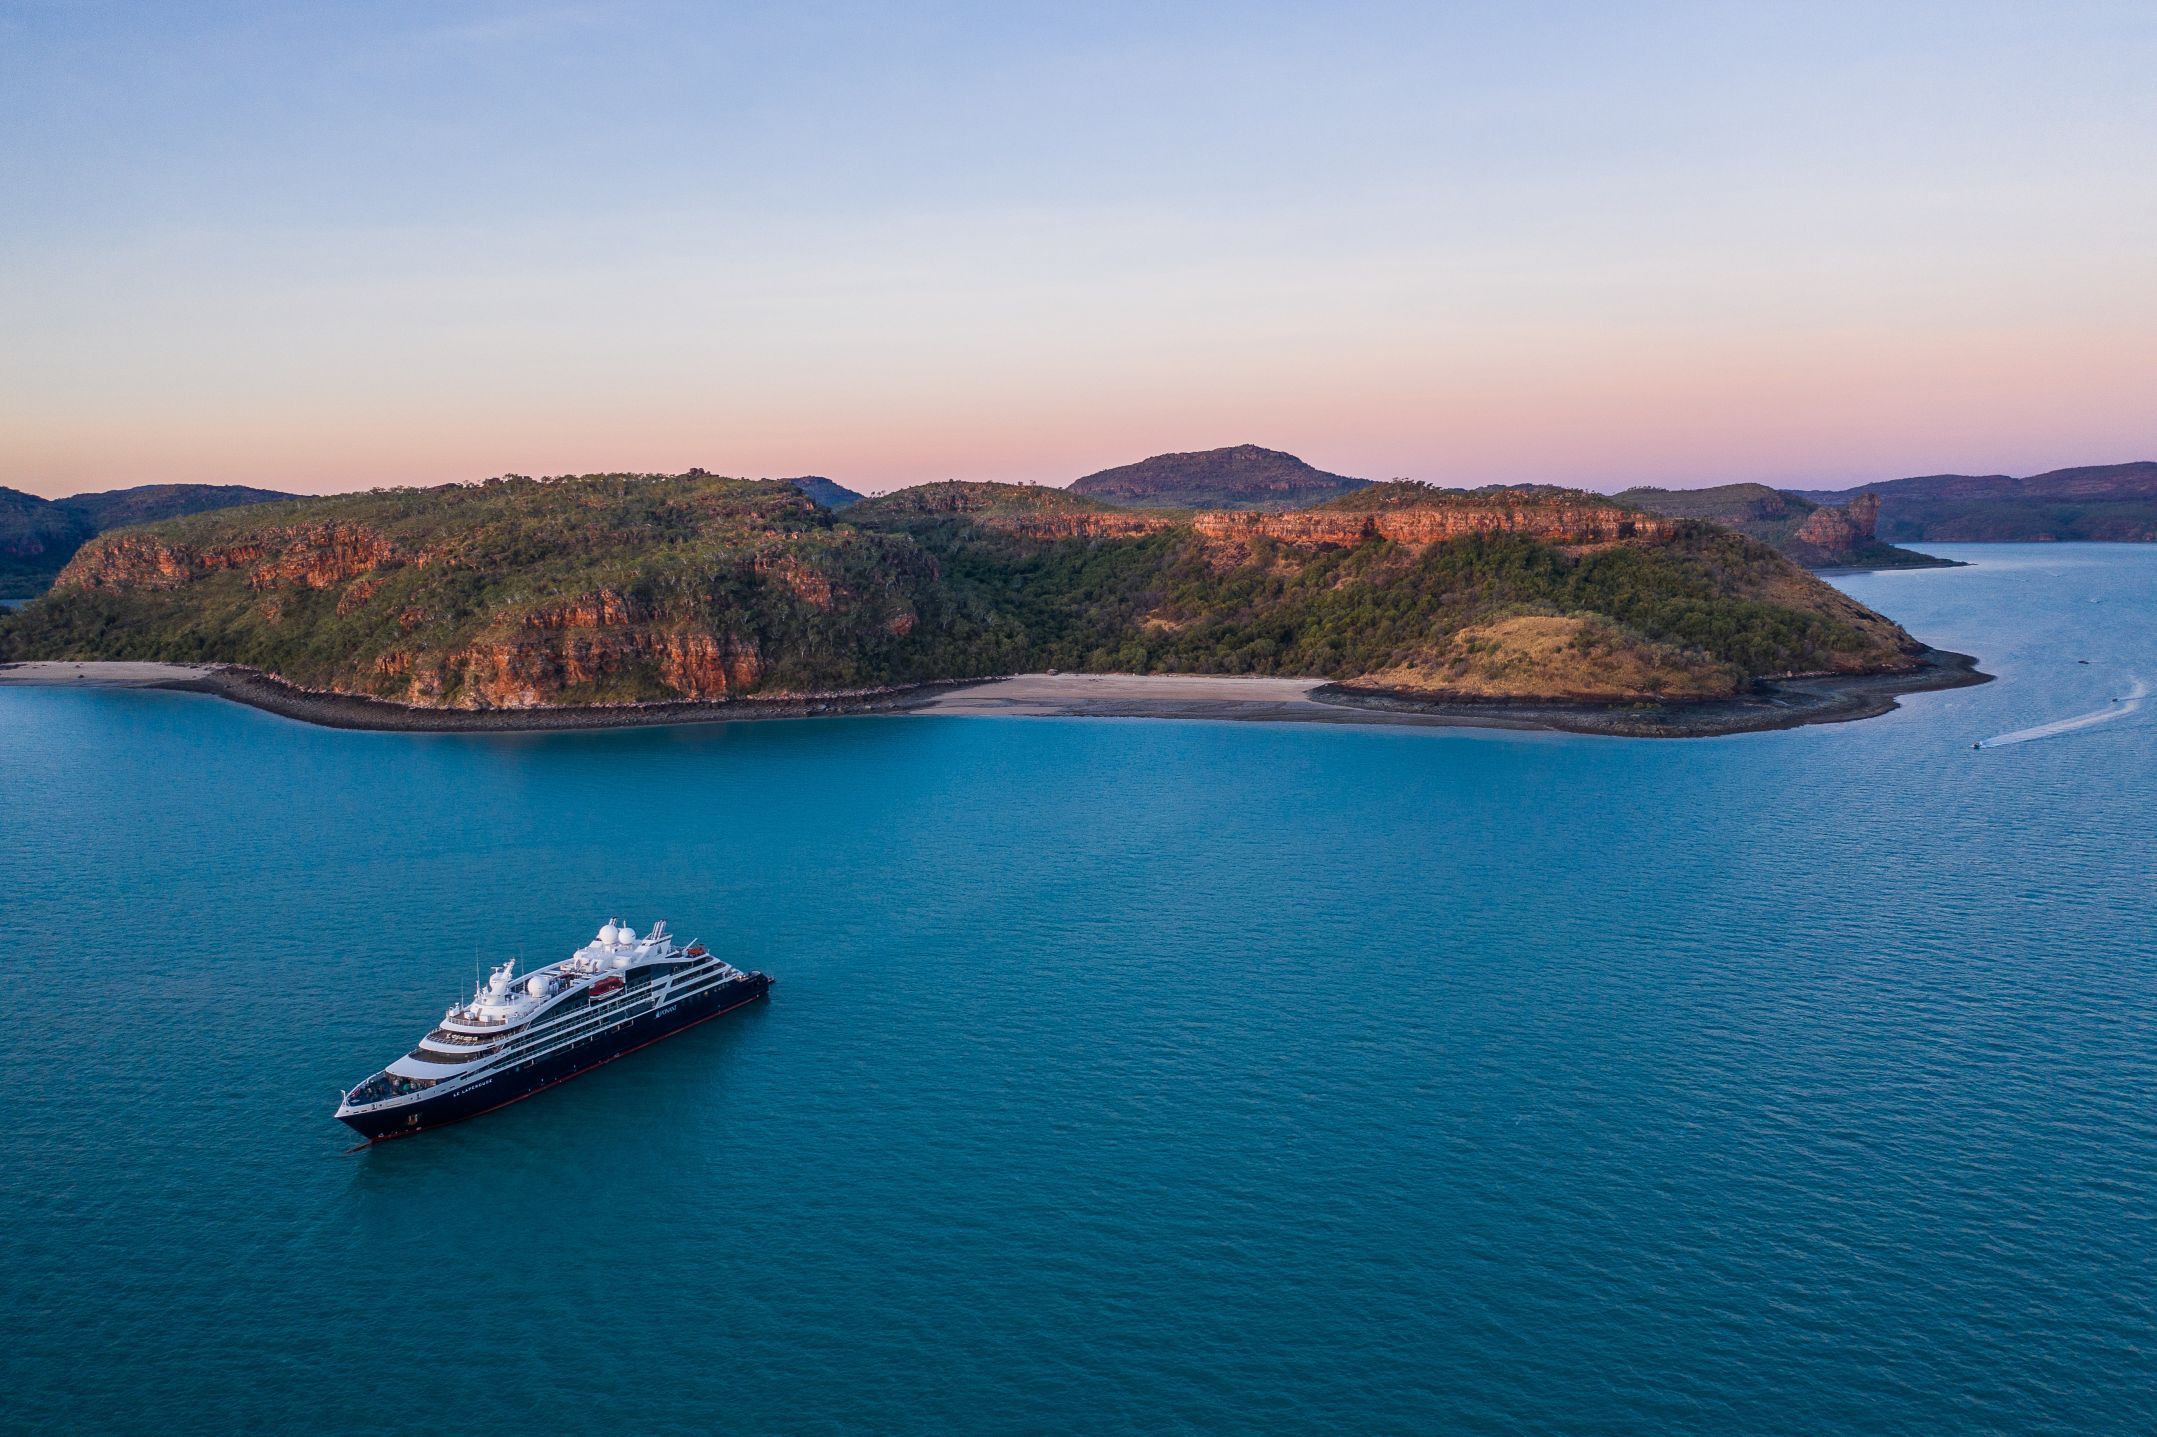 Packed with maritime history, unique wildlife, and geological wonders, cruise line Ponant will offer new luxury expedition itineraries that explore the many landscapes of Australia this year. 